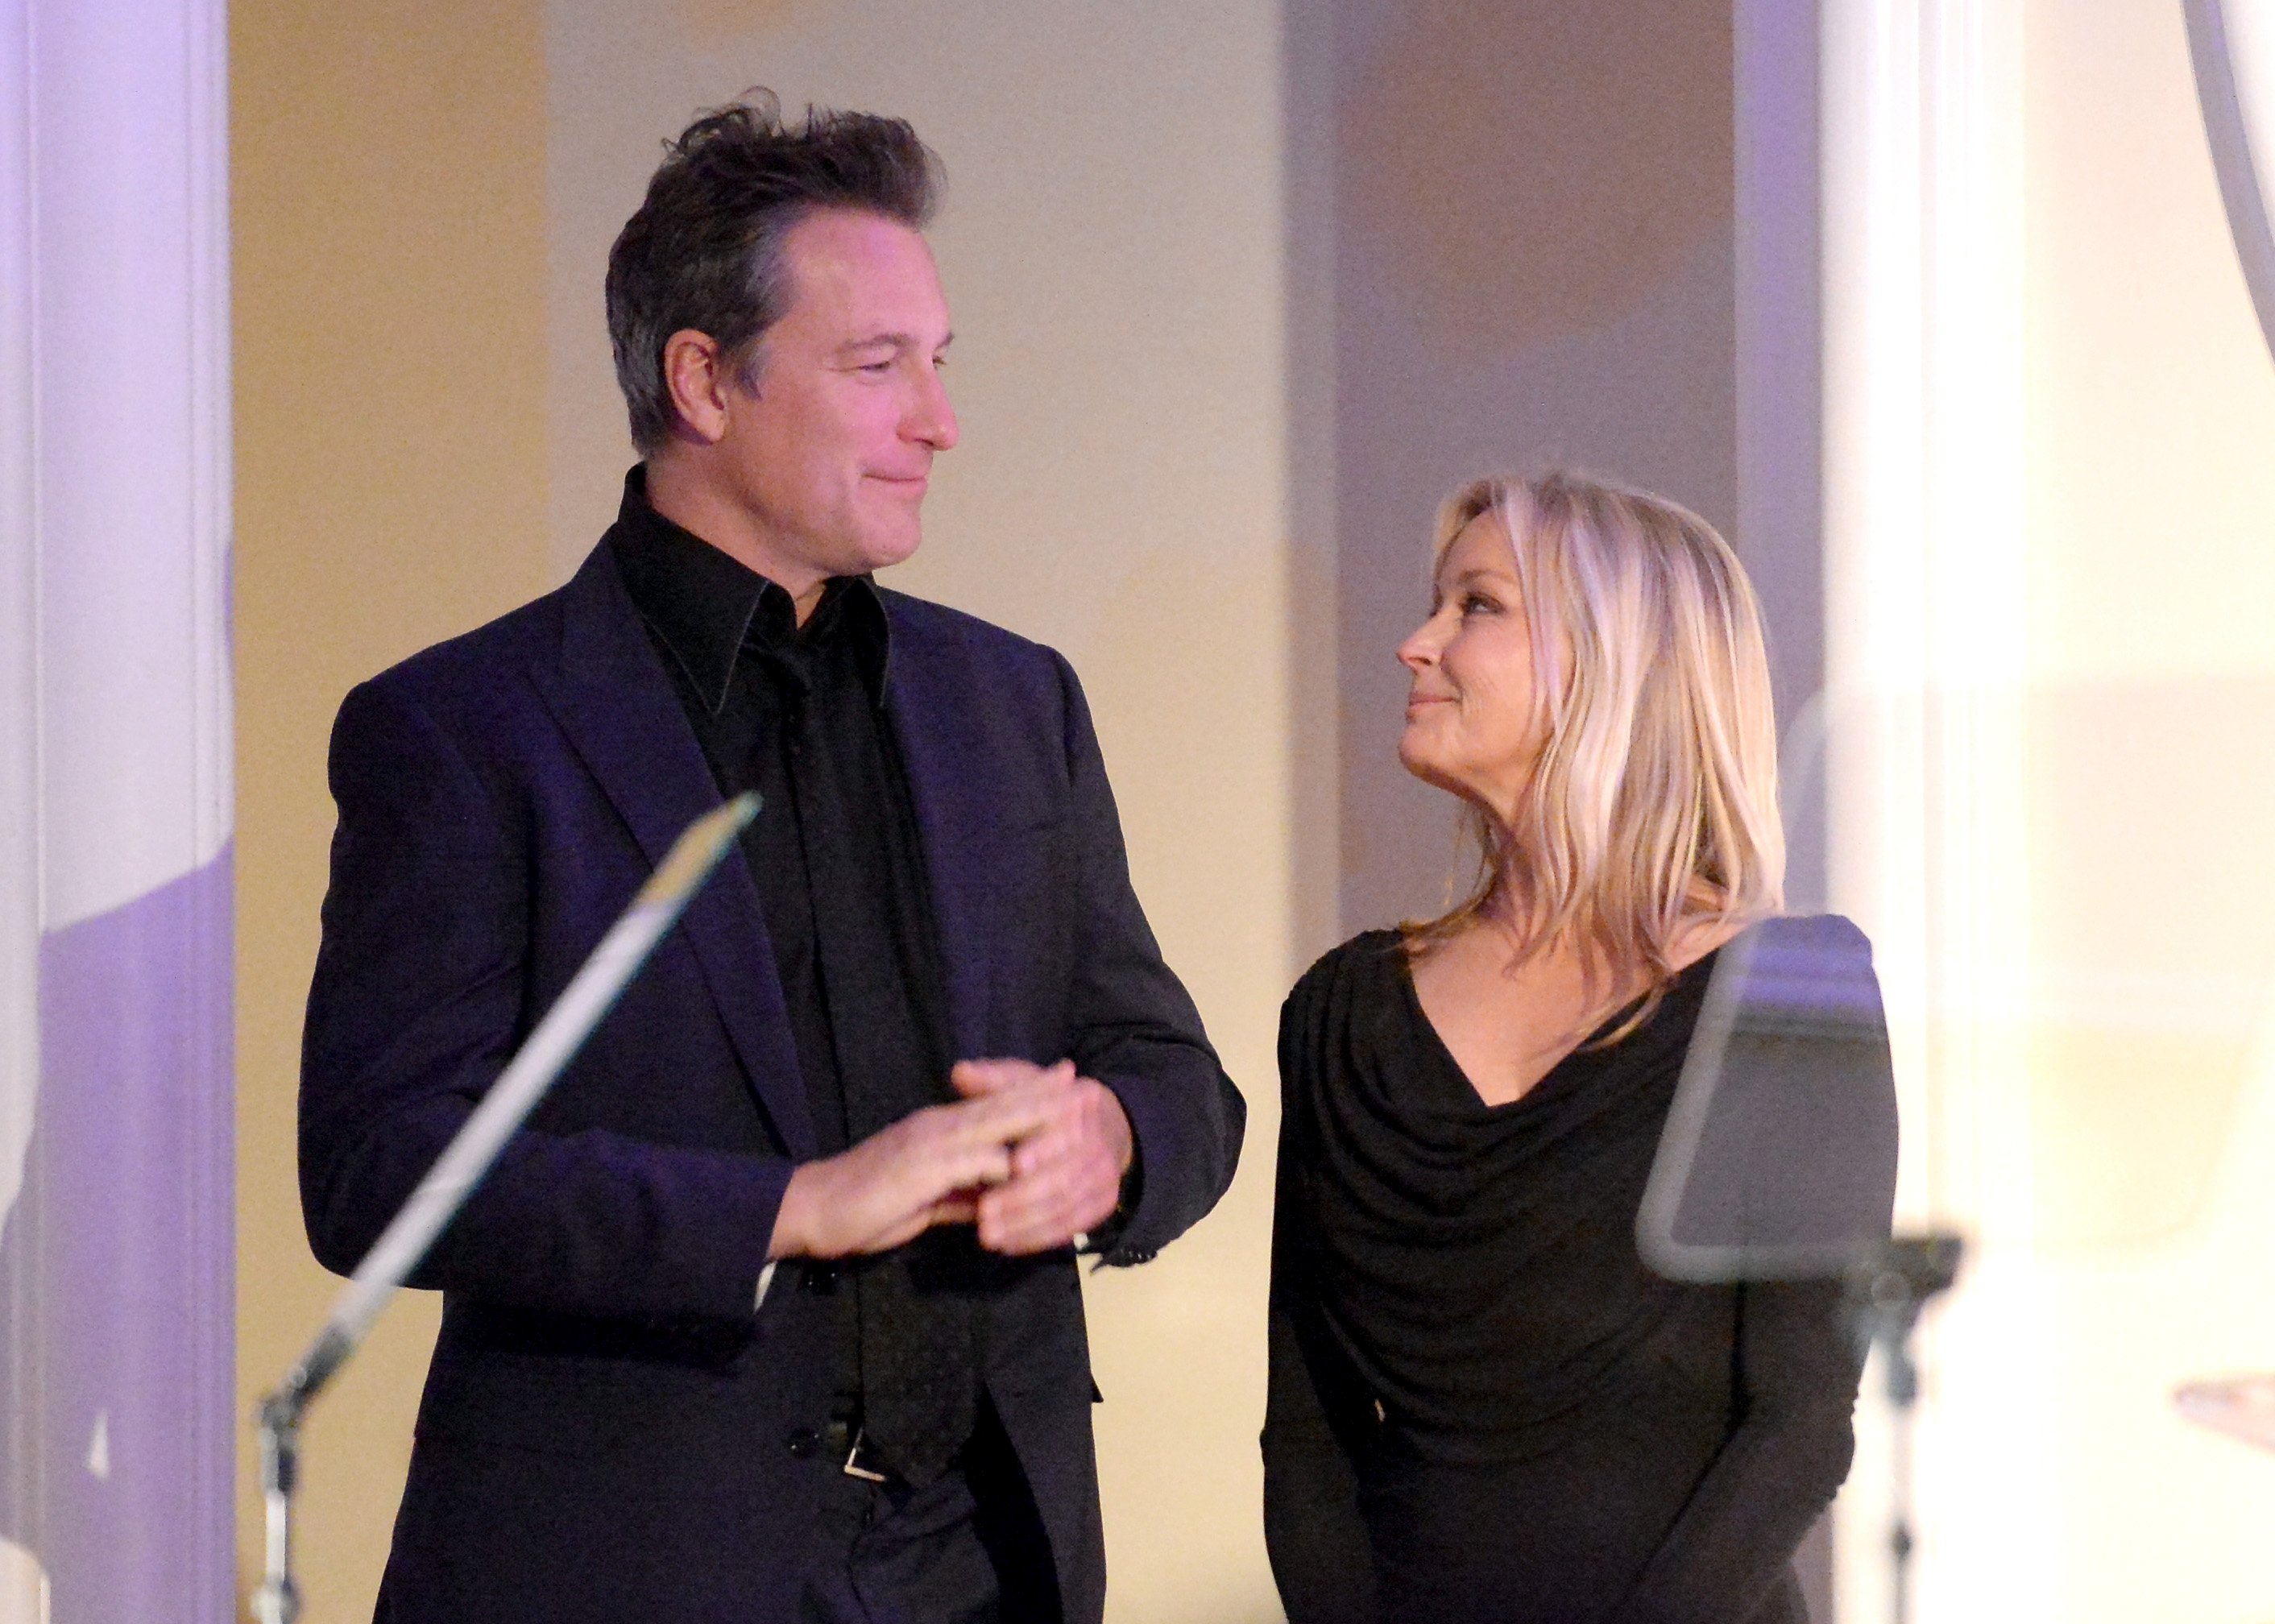 John Corbett and Bo Derek speak onstage during the International Women's Media Foundation's 2013 Courage in Journalism Awards at the Beverly Hills Hotel on October 29, 2013 in Beverly Hills, California  | Source: Getty Images